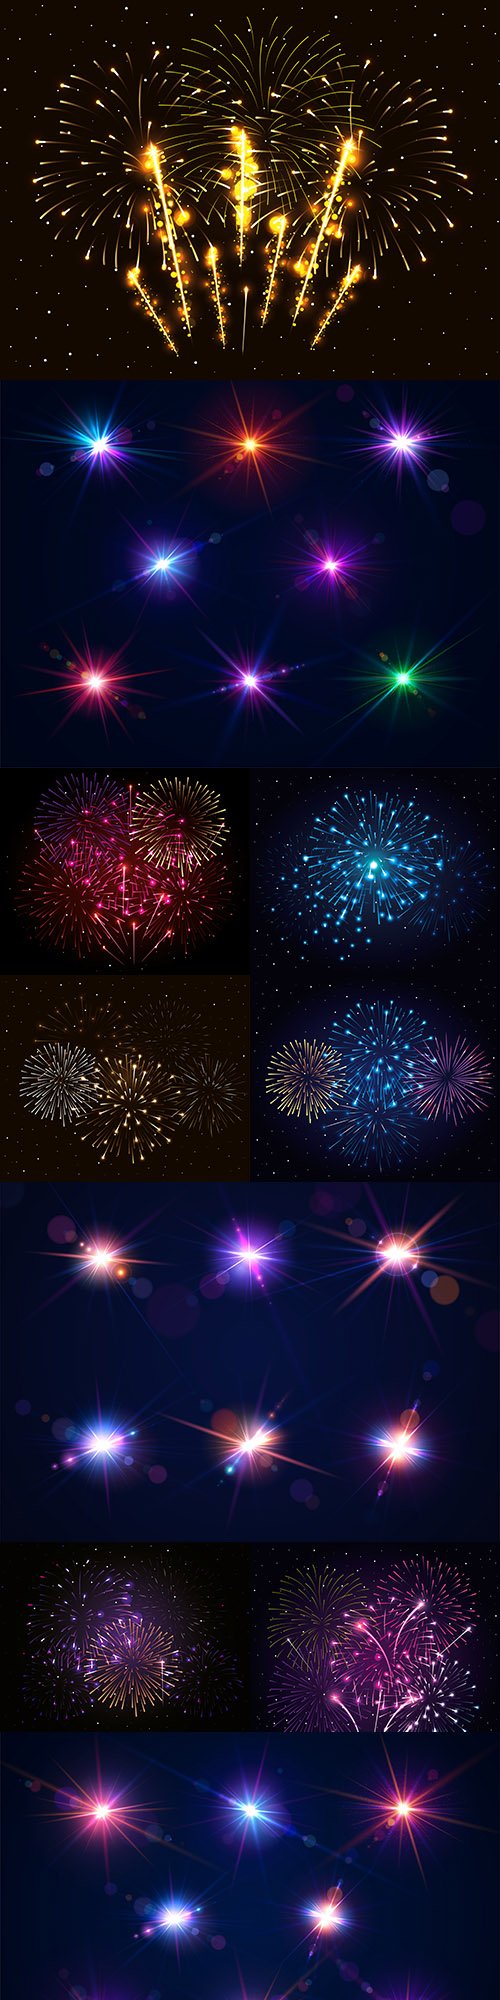 Festive fireworks and bright light effects illustration